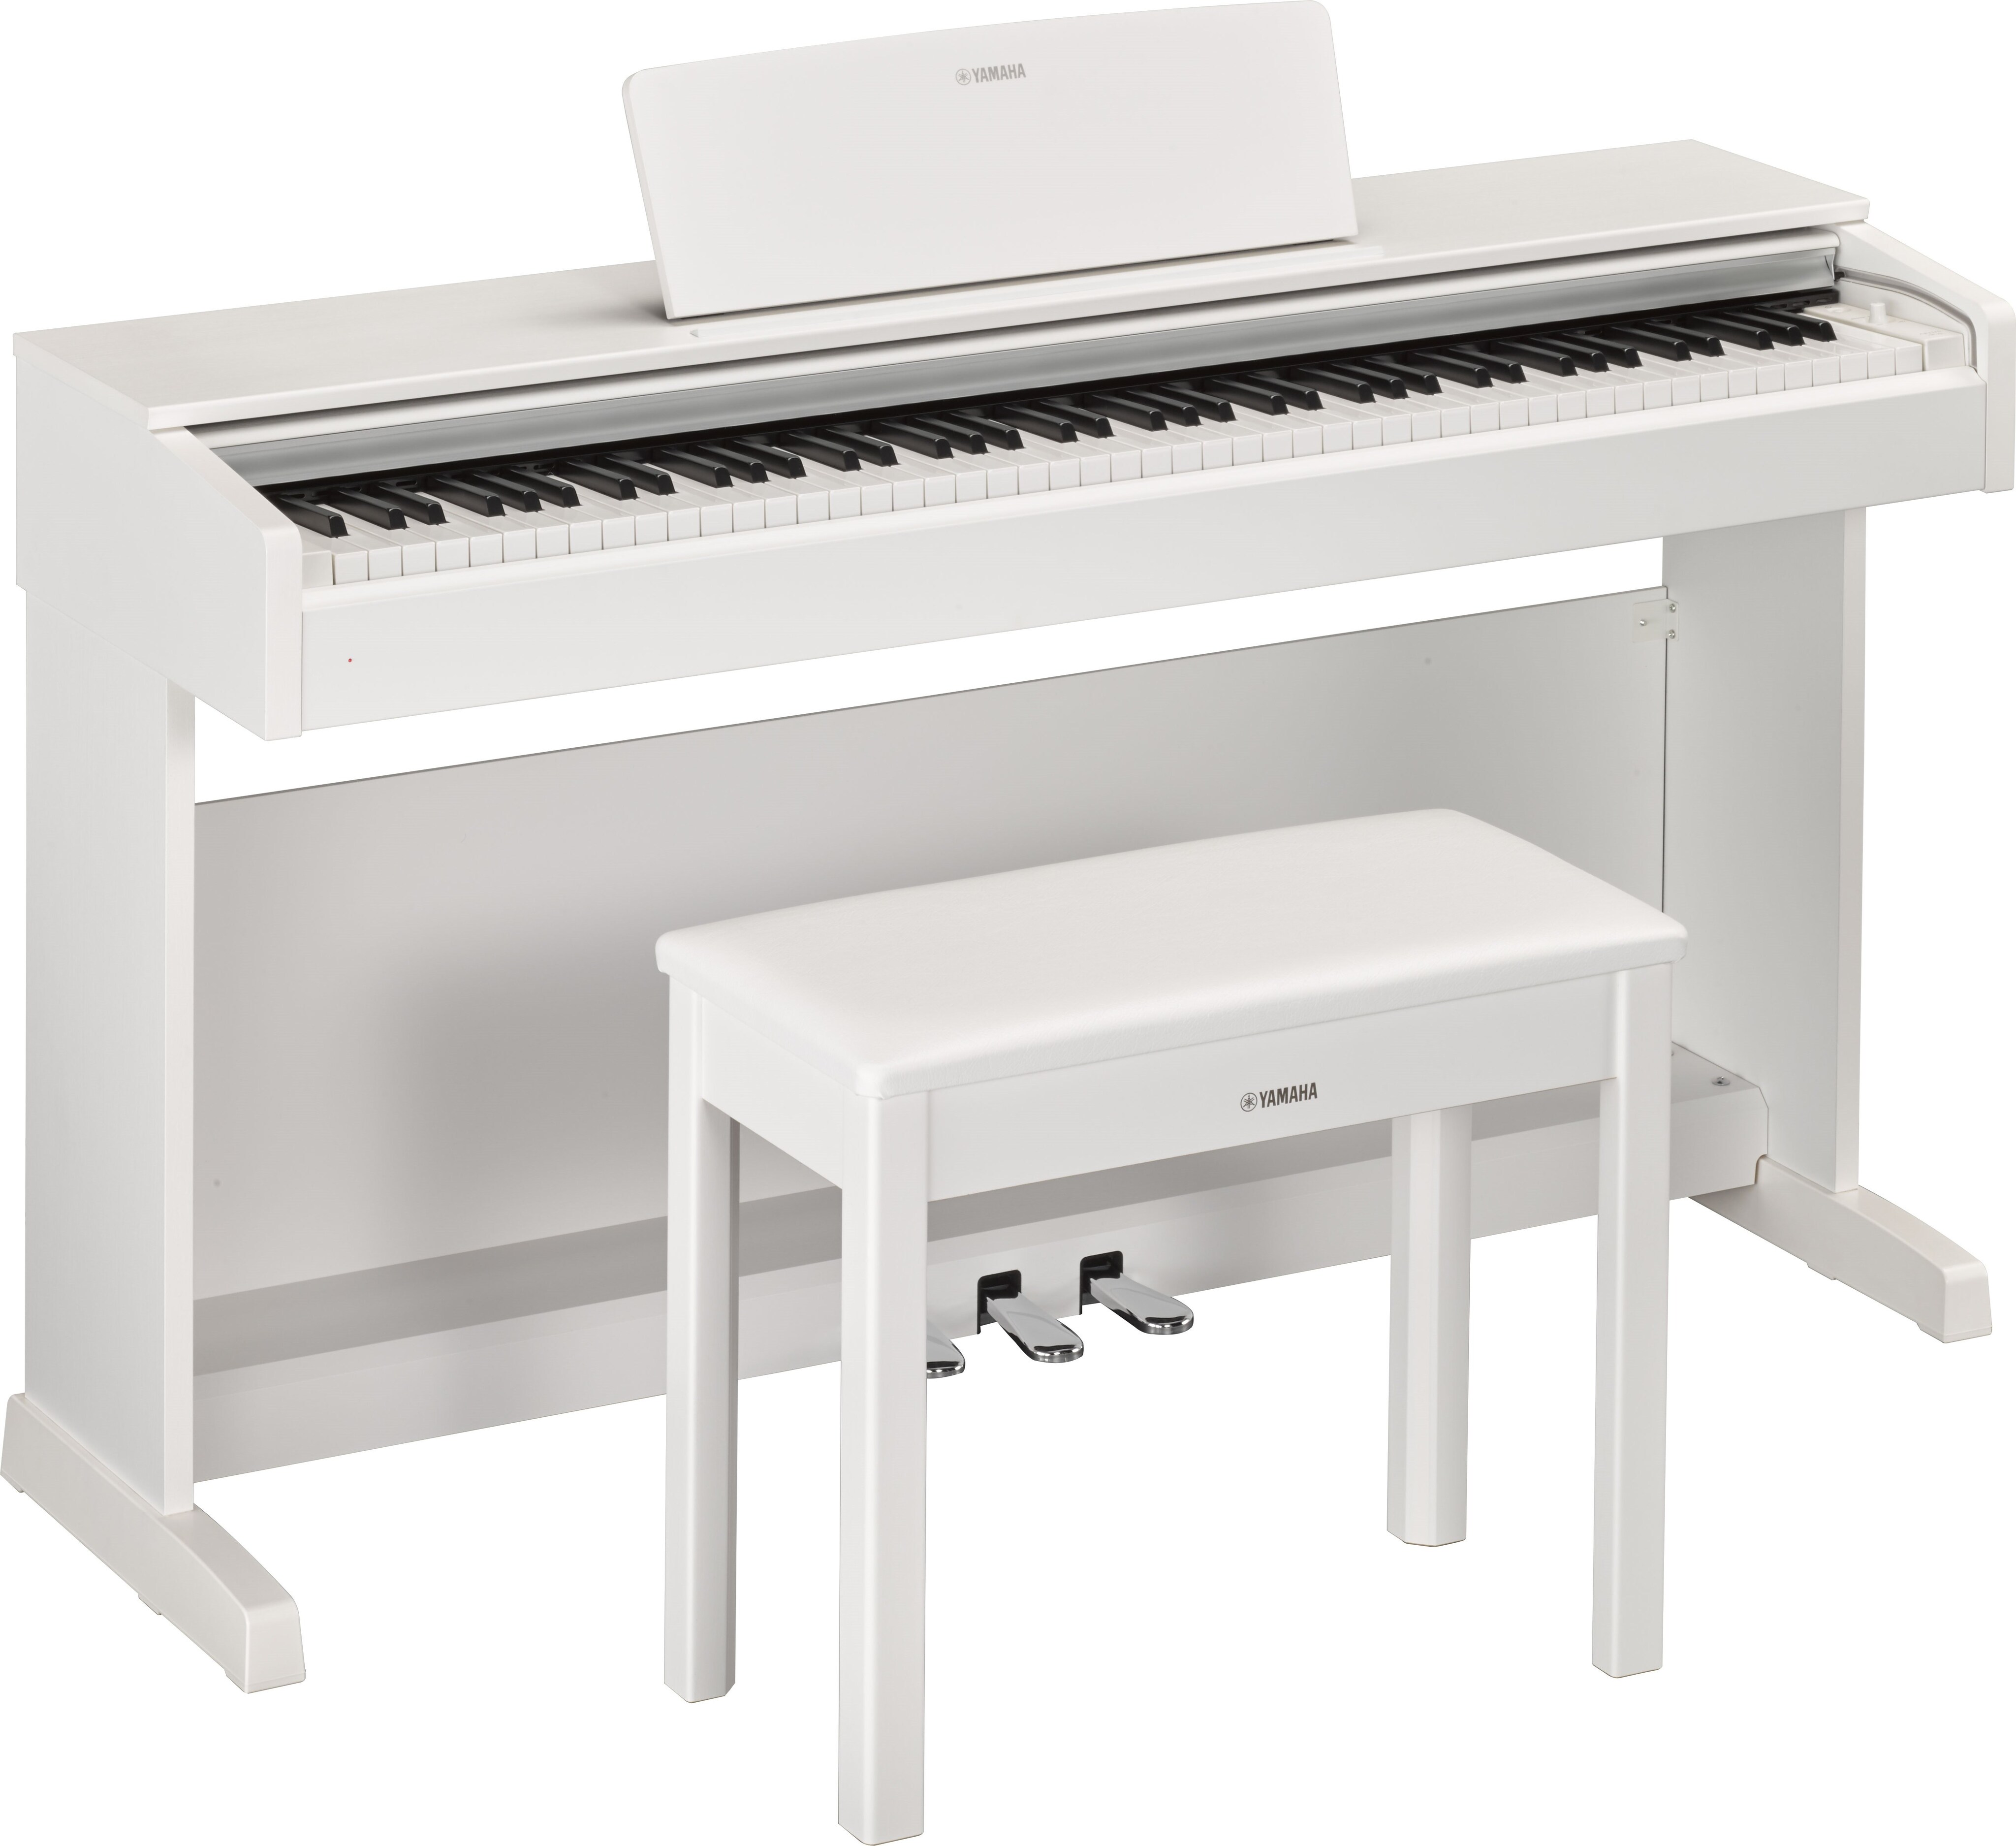 YDP-143 - Overview - ARIUS - Pianos - Musical Instruments 